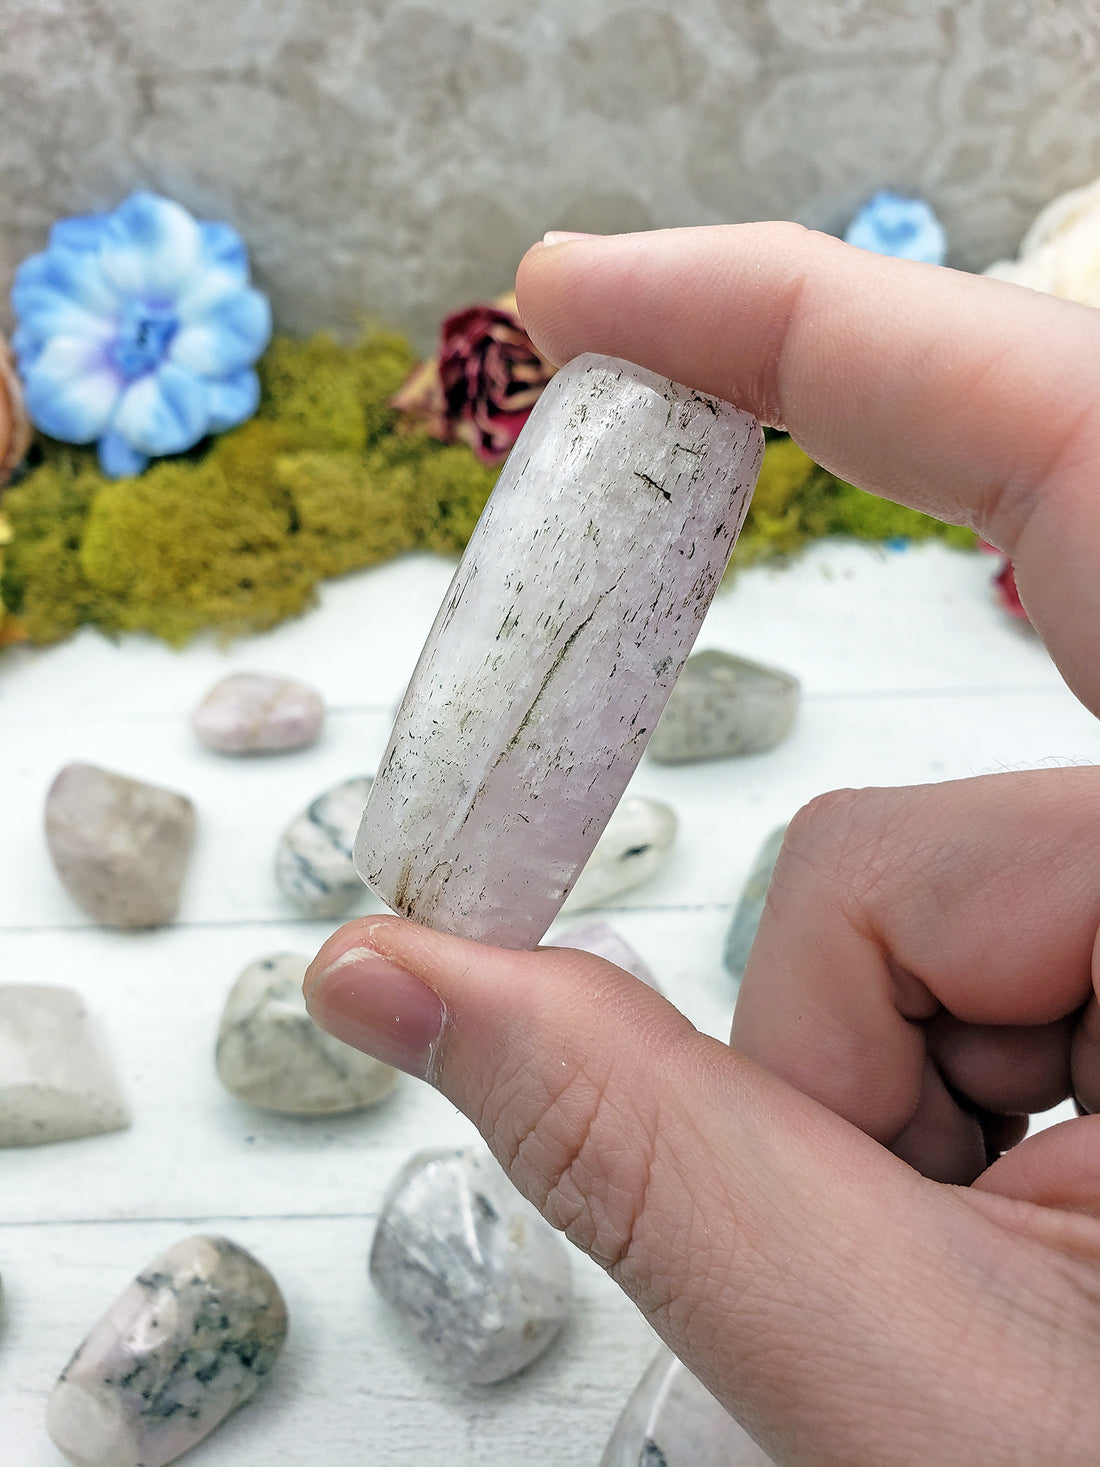 kunzite stone pinched in hand